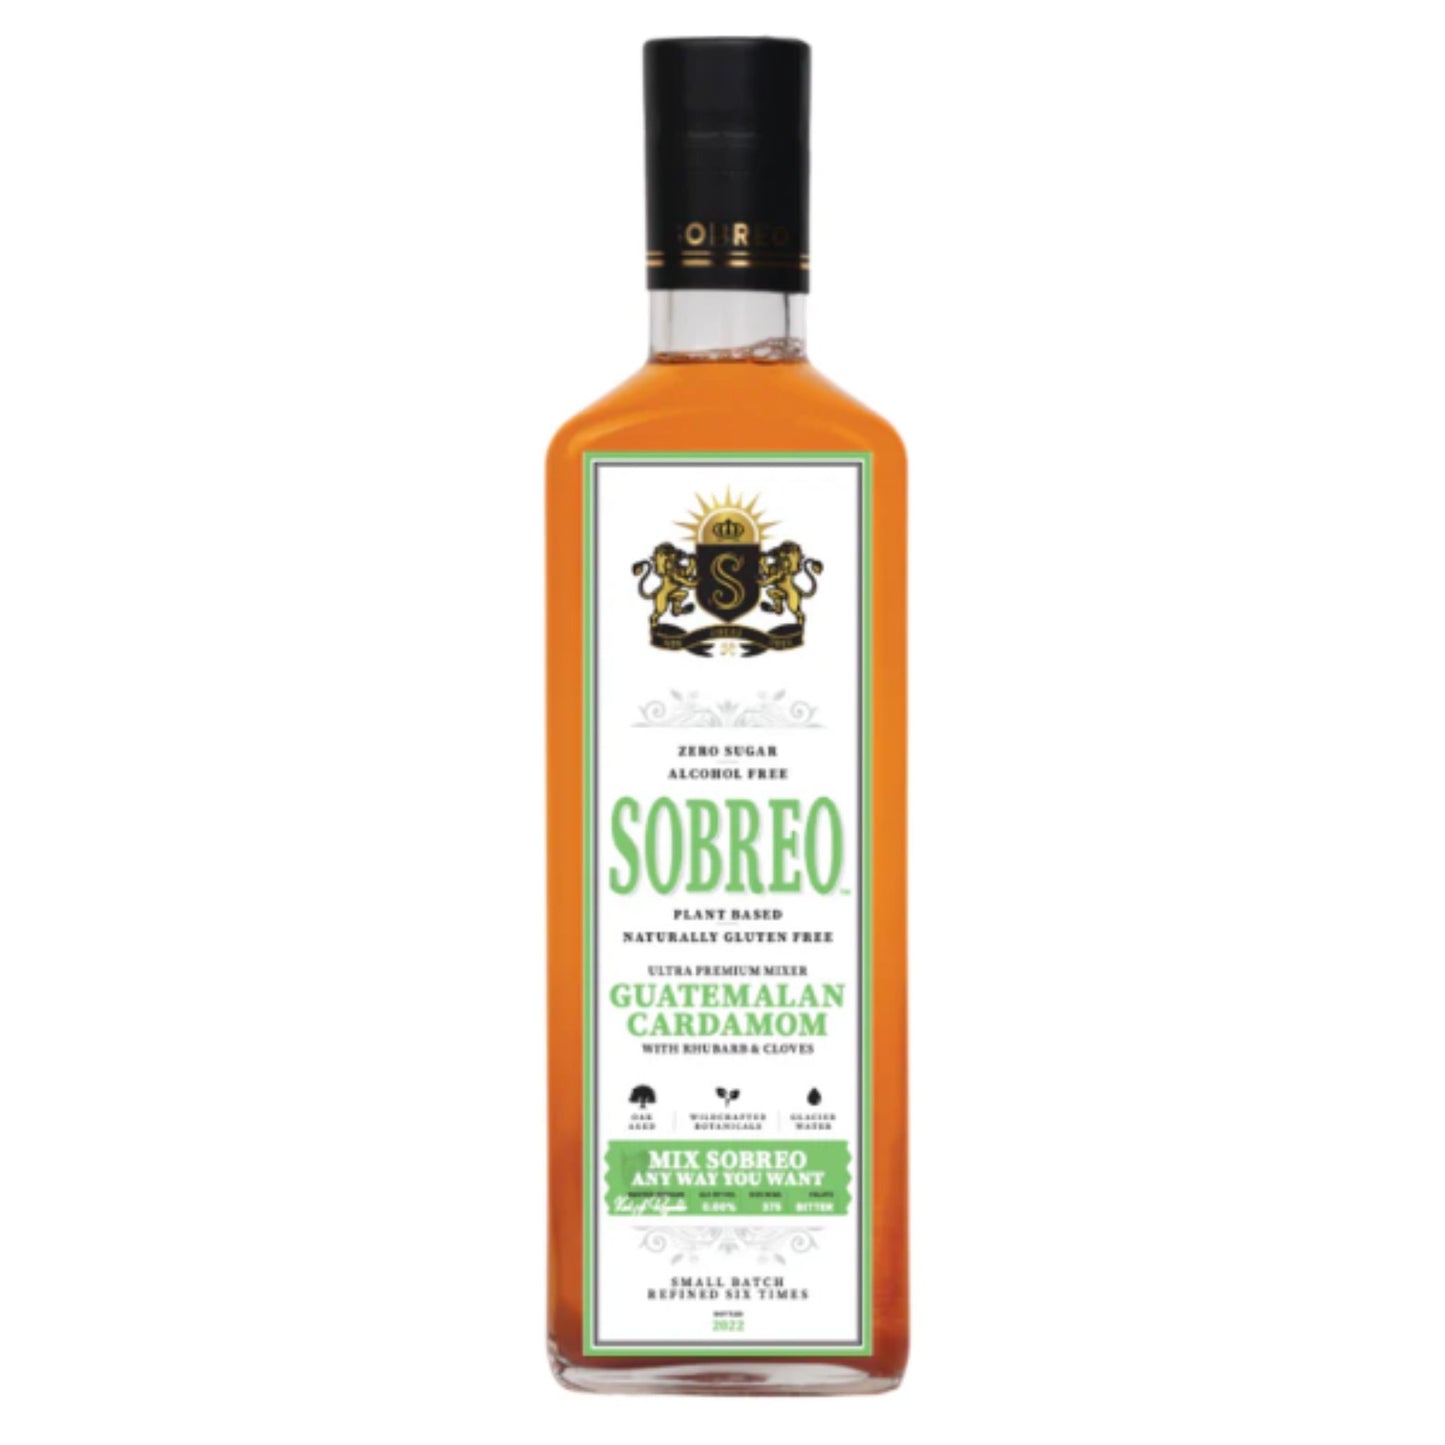 Sobreo Guatemalan Cardamom non-alcoholic cocktail mixer is available for sale at Knyota Drinks.